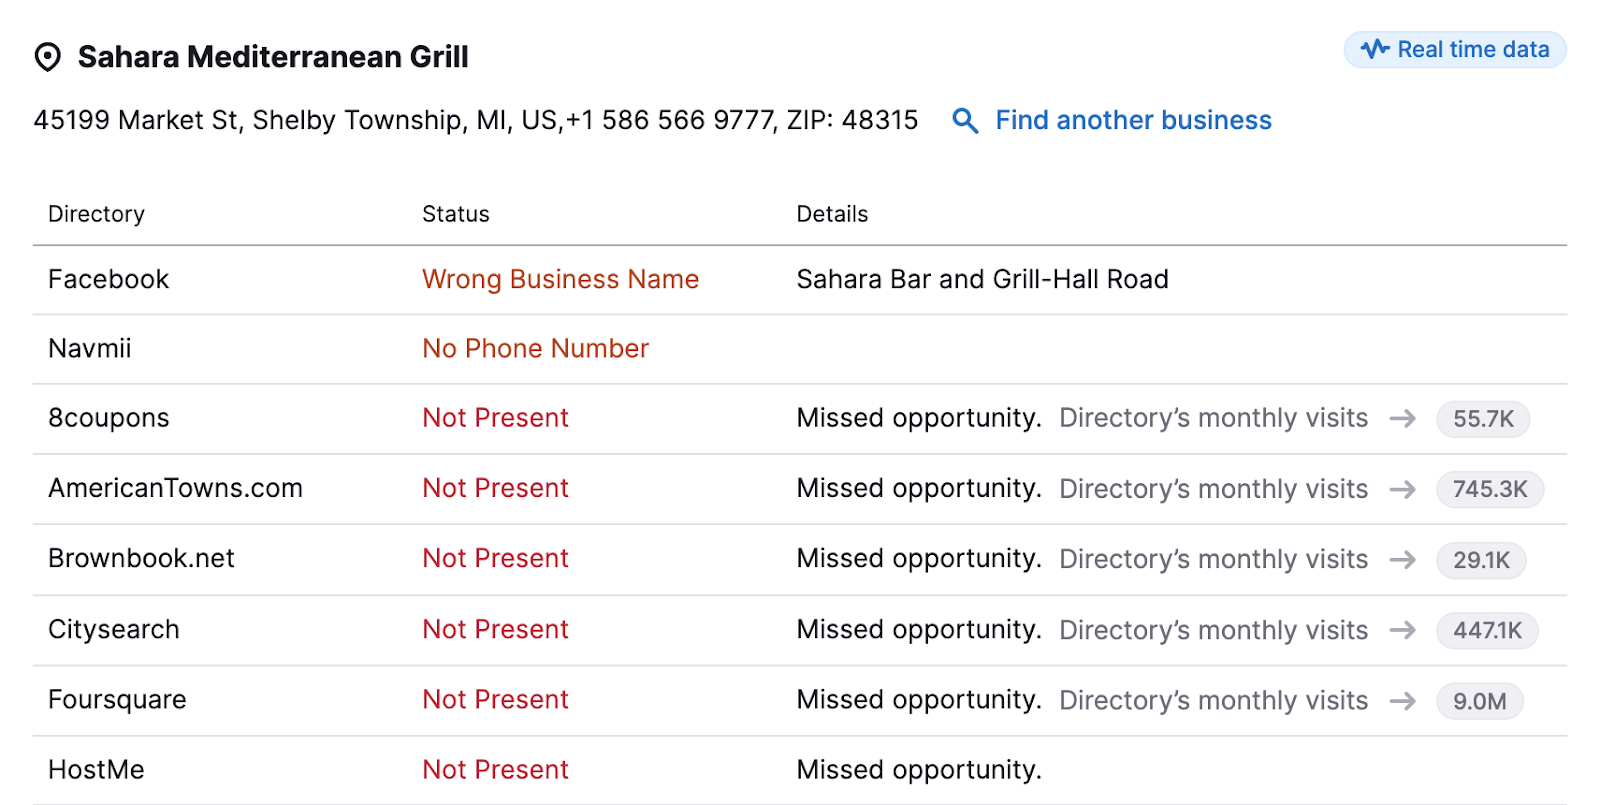 Errors and missed opportunities for "Sahara Mediterranean Grill" identified in Listing Management tool